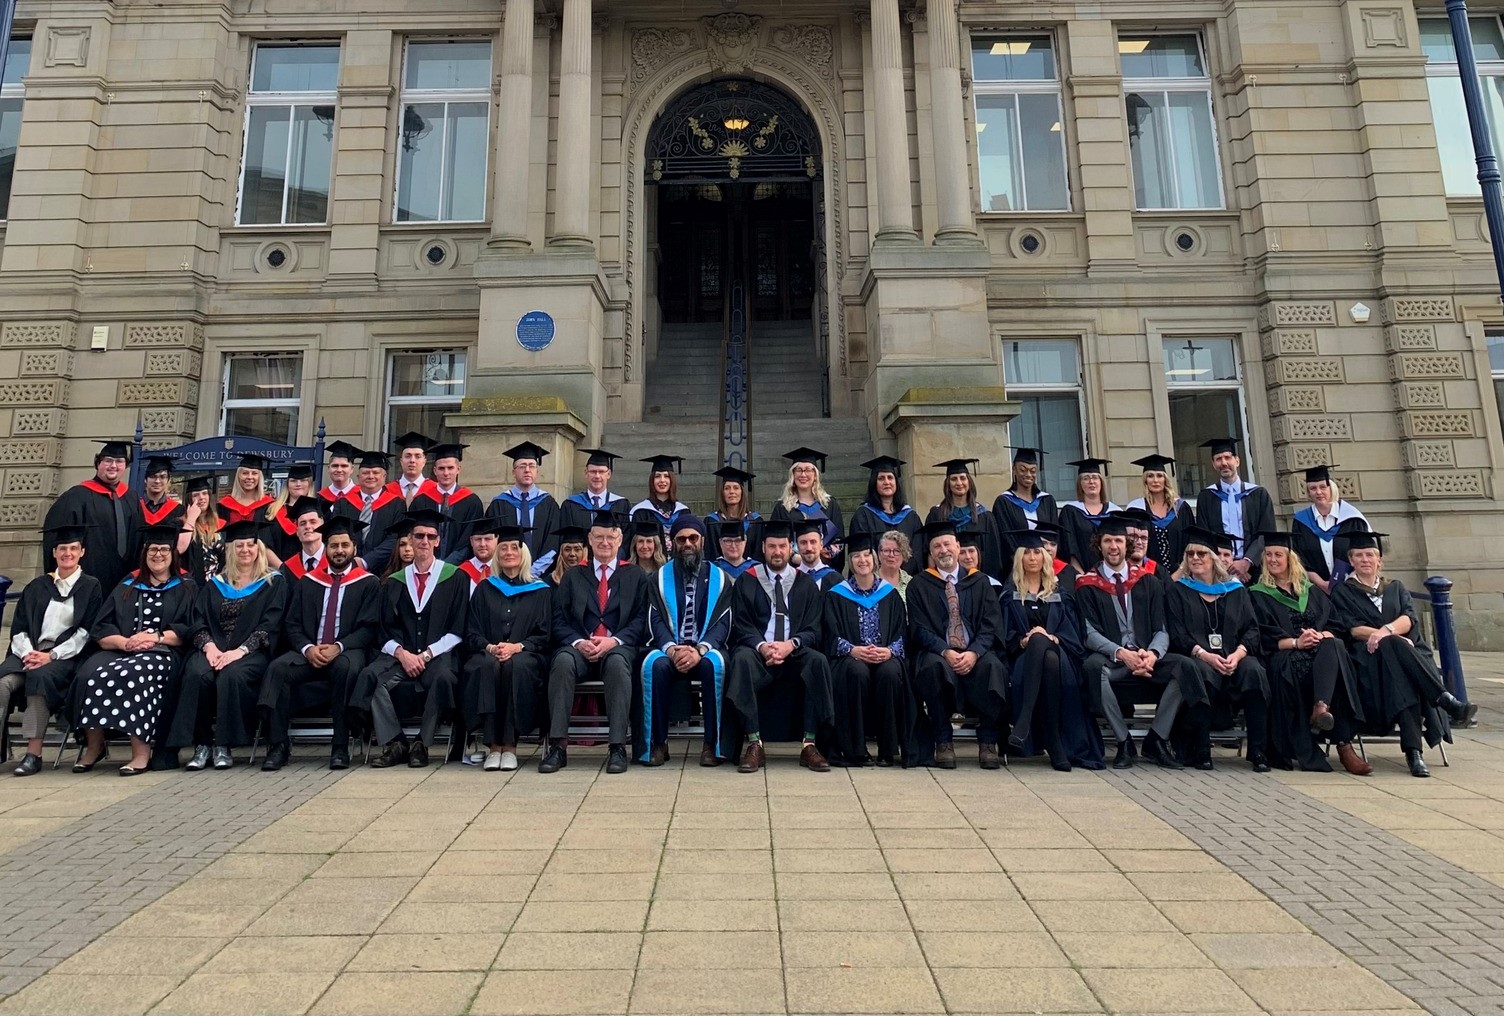 Students and staff in graduation robes sit outside Dewsbury Town Hall doors in two lines